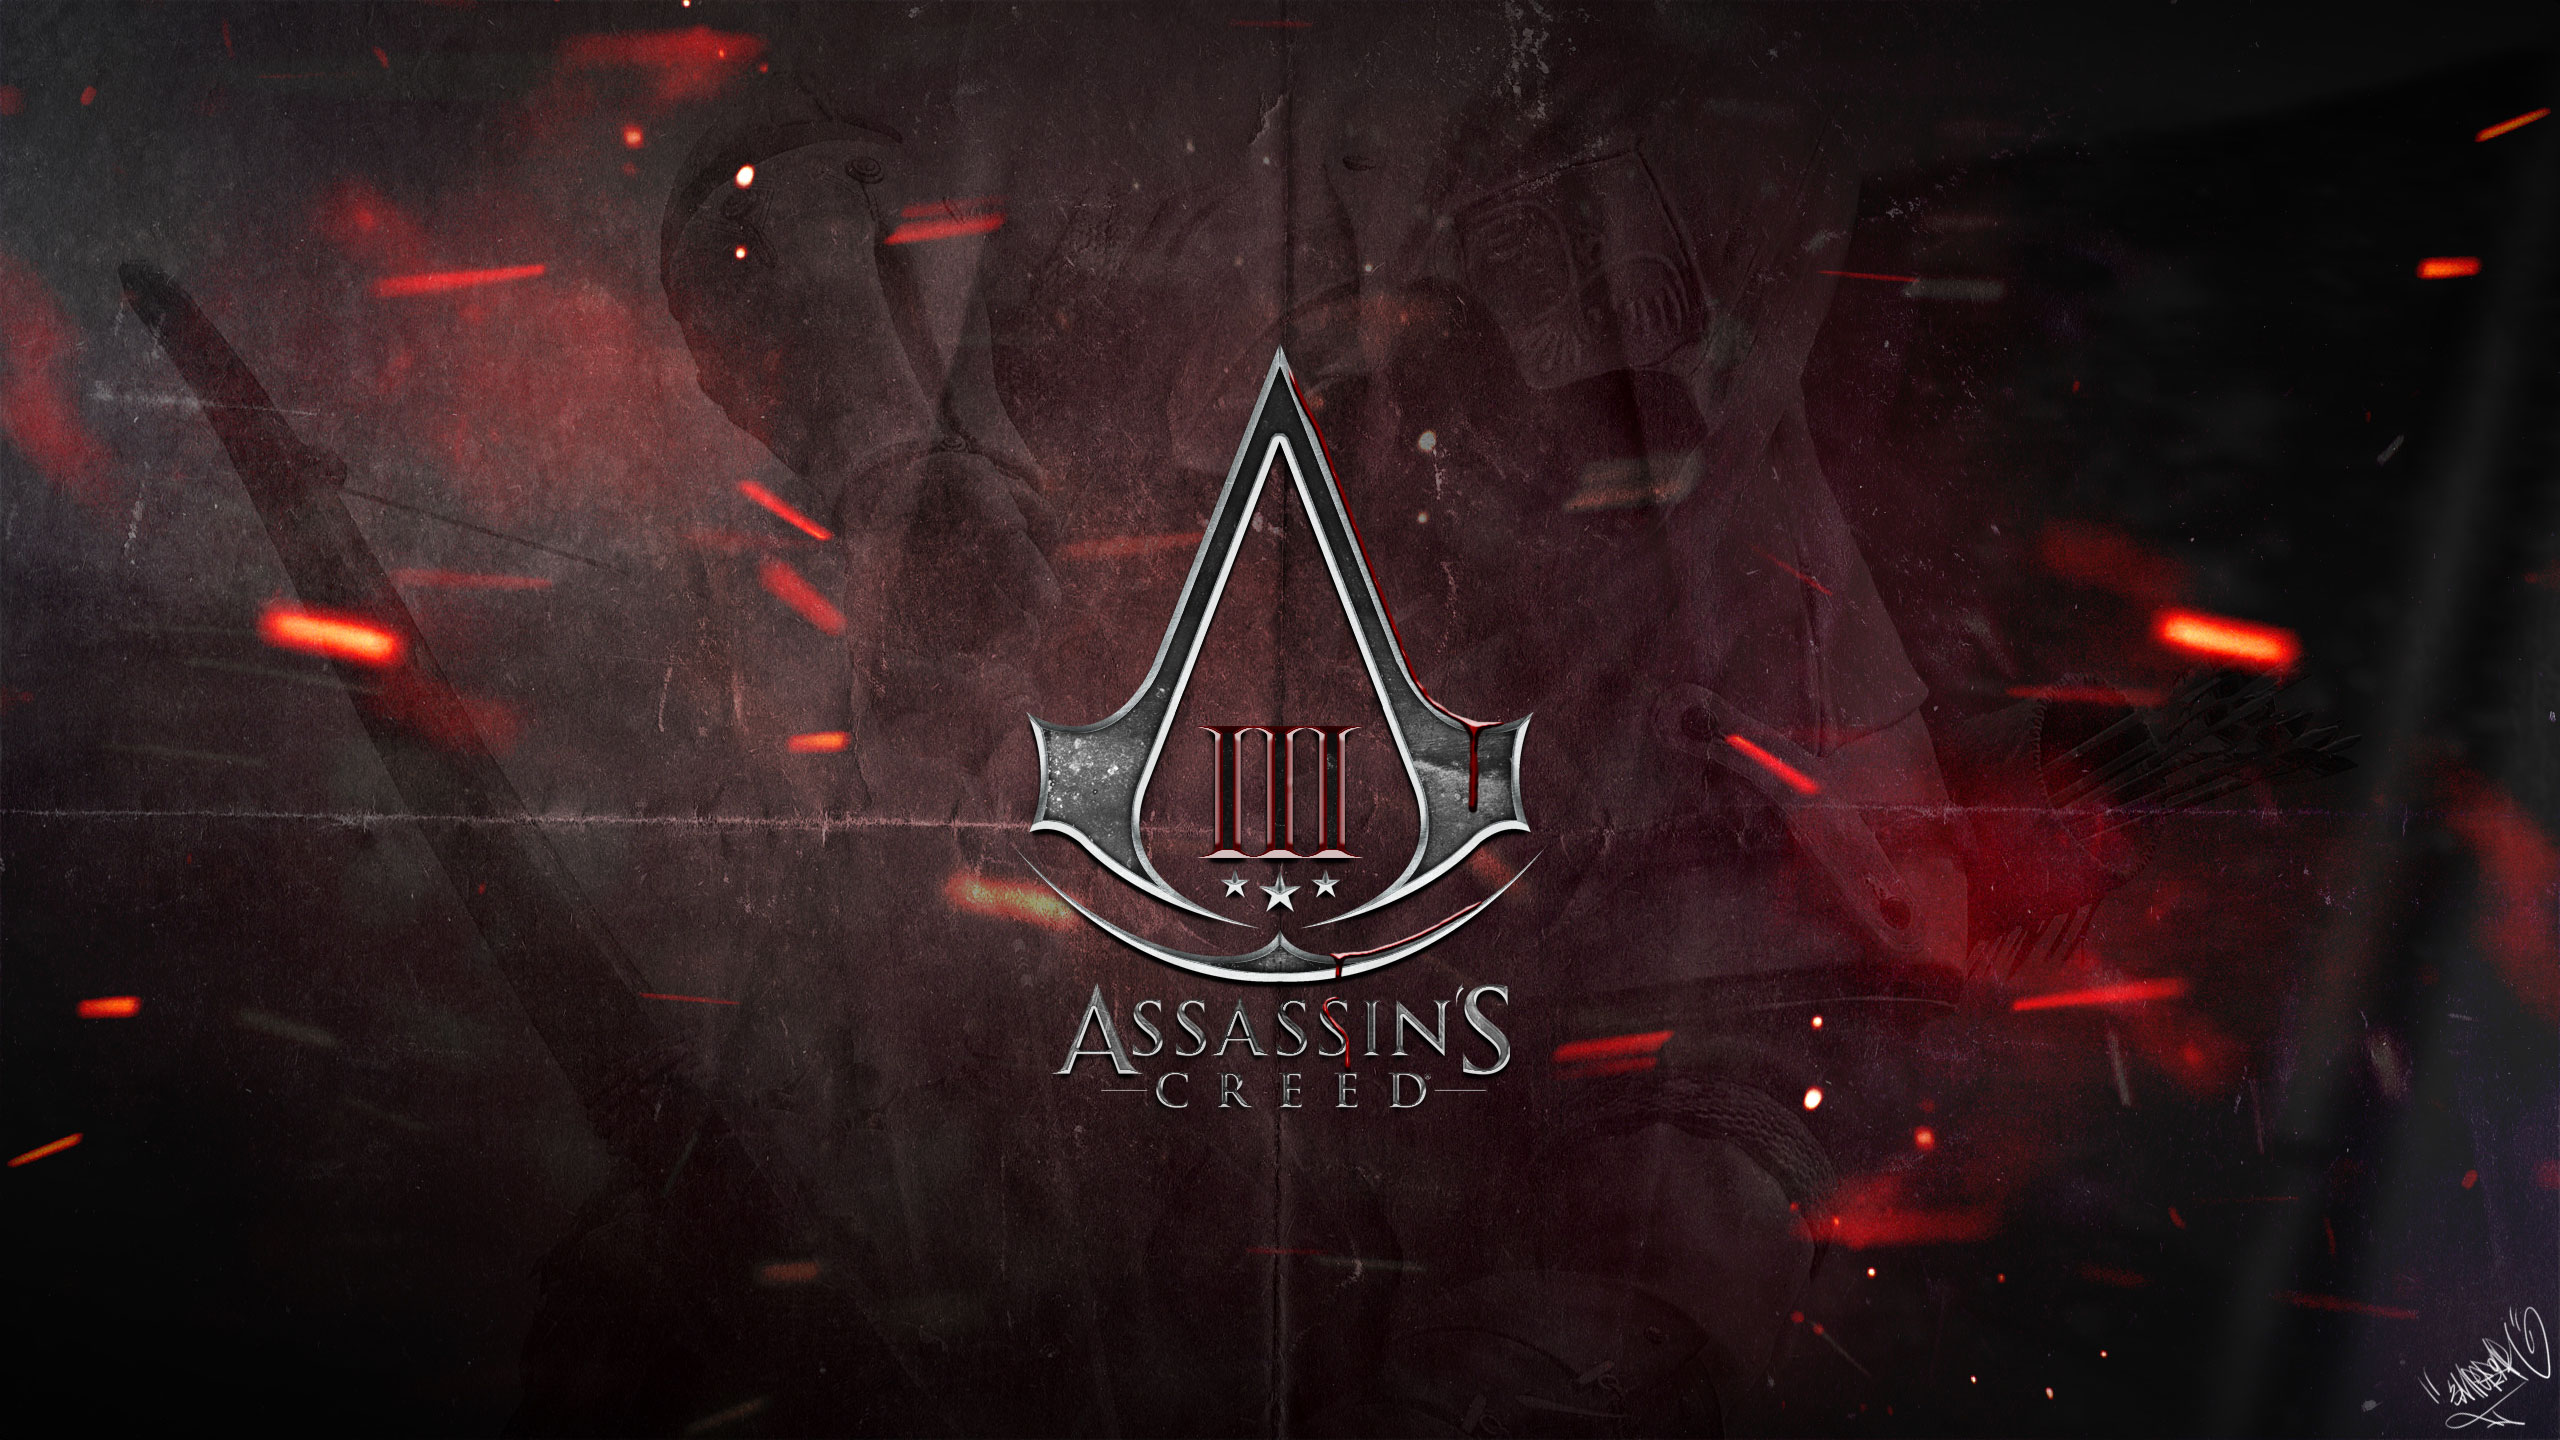 The Assassins images Assassins Creed 3 HD wallpaper and background